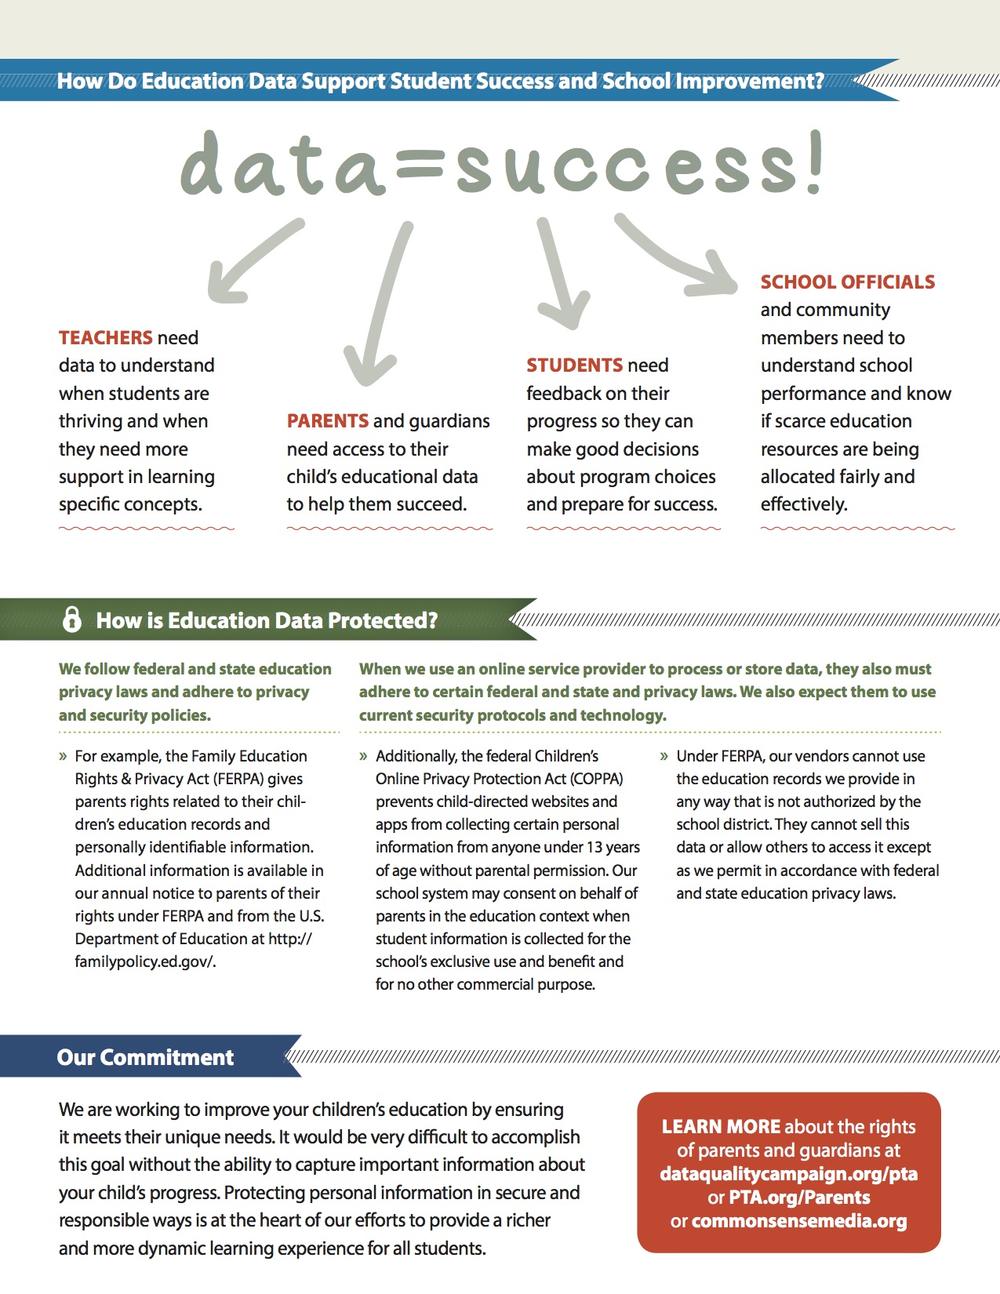 Data = Success. TEACHERS need data to understand when students are thriving and when they need more support in learning specific concepts. PARENTS and guardians need access to their child's educational data to help them succeed. STUDENTS need feedback on their progress so they can make good decisions about program choices and prepare for success. SCHOOL OFFICIALS and community members need to understand school performance and know if scarce education resources are being allocated fairly and effectively. 6 How is Education Data Protected? We follow federal and state education privacy laws and adhere to privacy and security policies. When we use an online service provider to process or store data, they also must adhere to certain federal and state and privacy laws. We also expect them to use current security protocols and technology. » For example, the Family Education Rights & Privacy Act (FERPA) gives parents rights related to their chil- dren's education records and personally identifiable information. Additional information is available in our annual notice to parents of their rights under FERPA and from the U.S. Department of Education at http:// familypolicy.ed.gov/. » Additionally, the federal Children's Online Privacy Protection Act (COPPA) prevents child-directed websites and apps from collecting certain personal information from anyone under 13 years of age without parental permission. Our school system may consent on behalf of parents in the education context when student information is collected for the school's exclusive use and benefit and for no other commercial purpose. » Under FERPA, our vendors cannot use the education records we provide in any way that is not authorized by the school district. They cannot sell this data or allow others to access it except as we permit in accordance with federal and state education privacy laws. Our Commitment We are working to improve your children's education by ensuring it meets their unique needs. It would be very difficult to accomplish this goal without the ability to capture important information about your child's progress. Protecting personal information in secure and responsible ways is at the heart of our efforts to provide a richer and more dynamic learning experience for all students. LEARN MORE about the rights of parents and guardians at dataqualitycampaign.org/pta or PTA.org/Parents or commonsensemedia.org